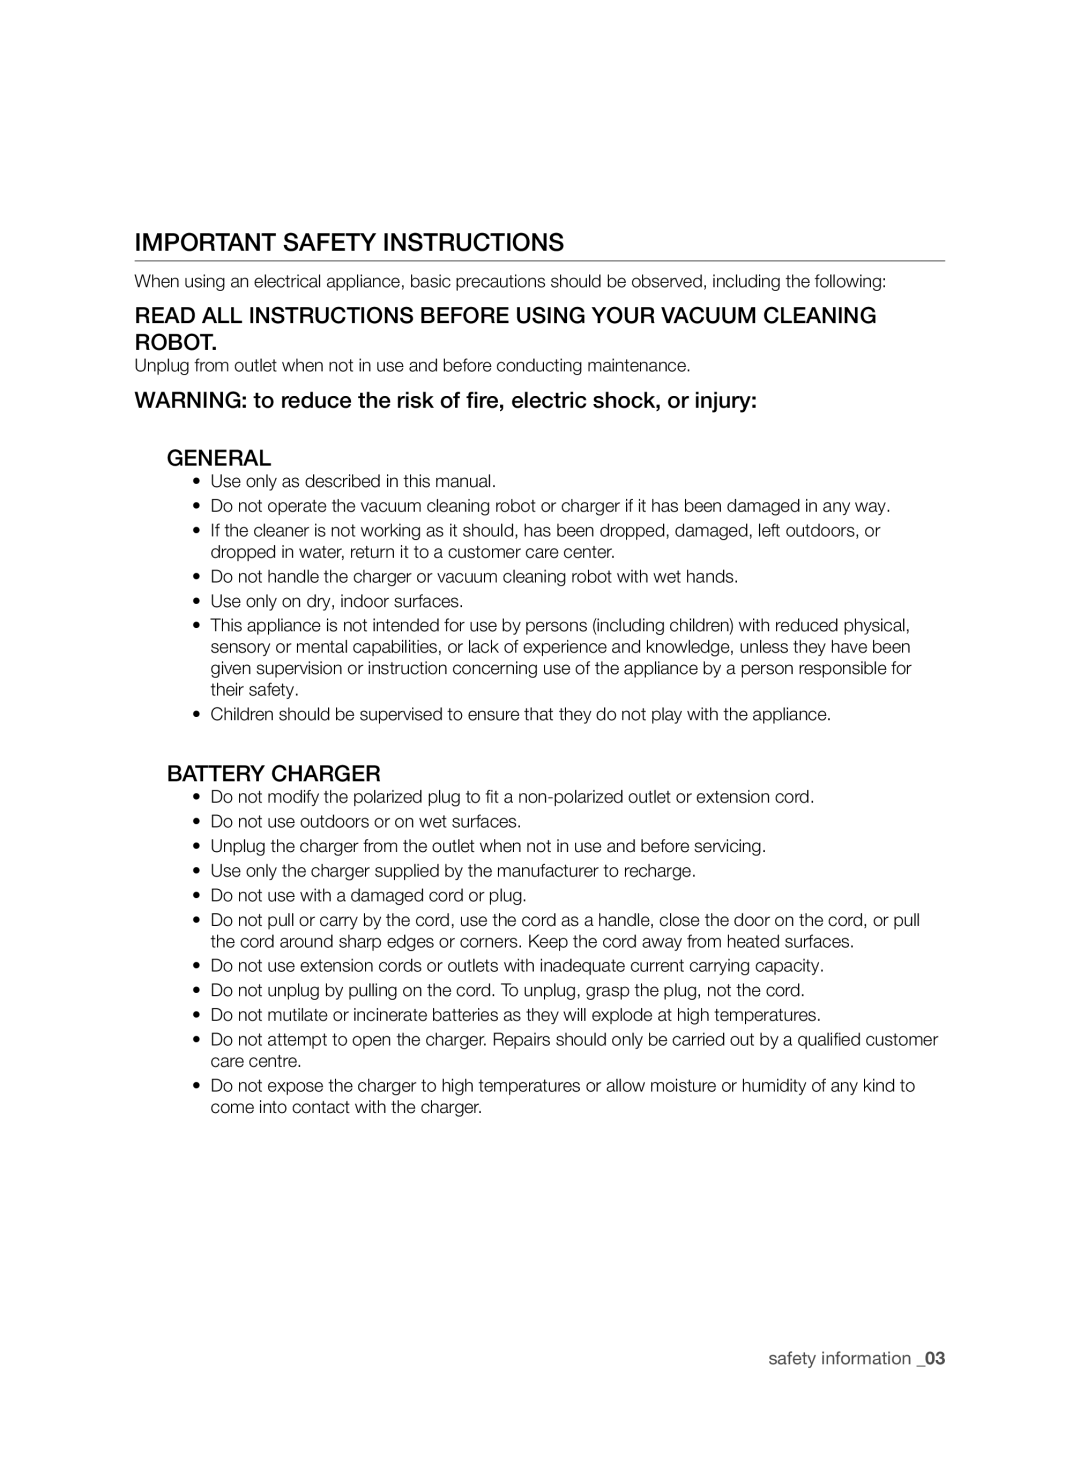 Samsung VCR8950L3B/XEF manual Important Safety Instructions, Read All Instructions Before Using Your Vacuum Cleaning Robot 